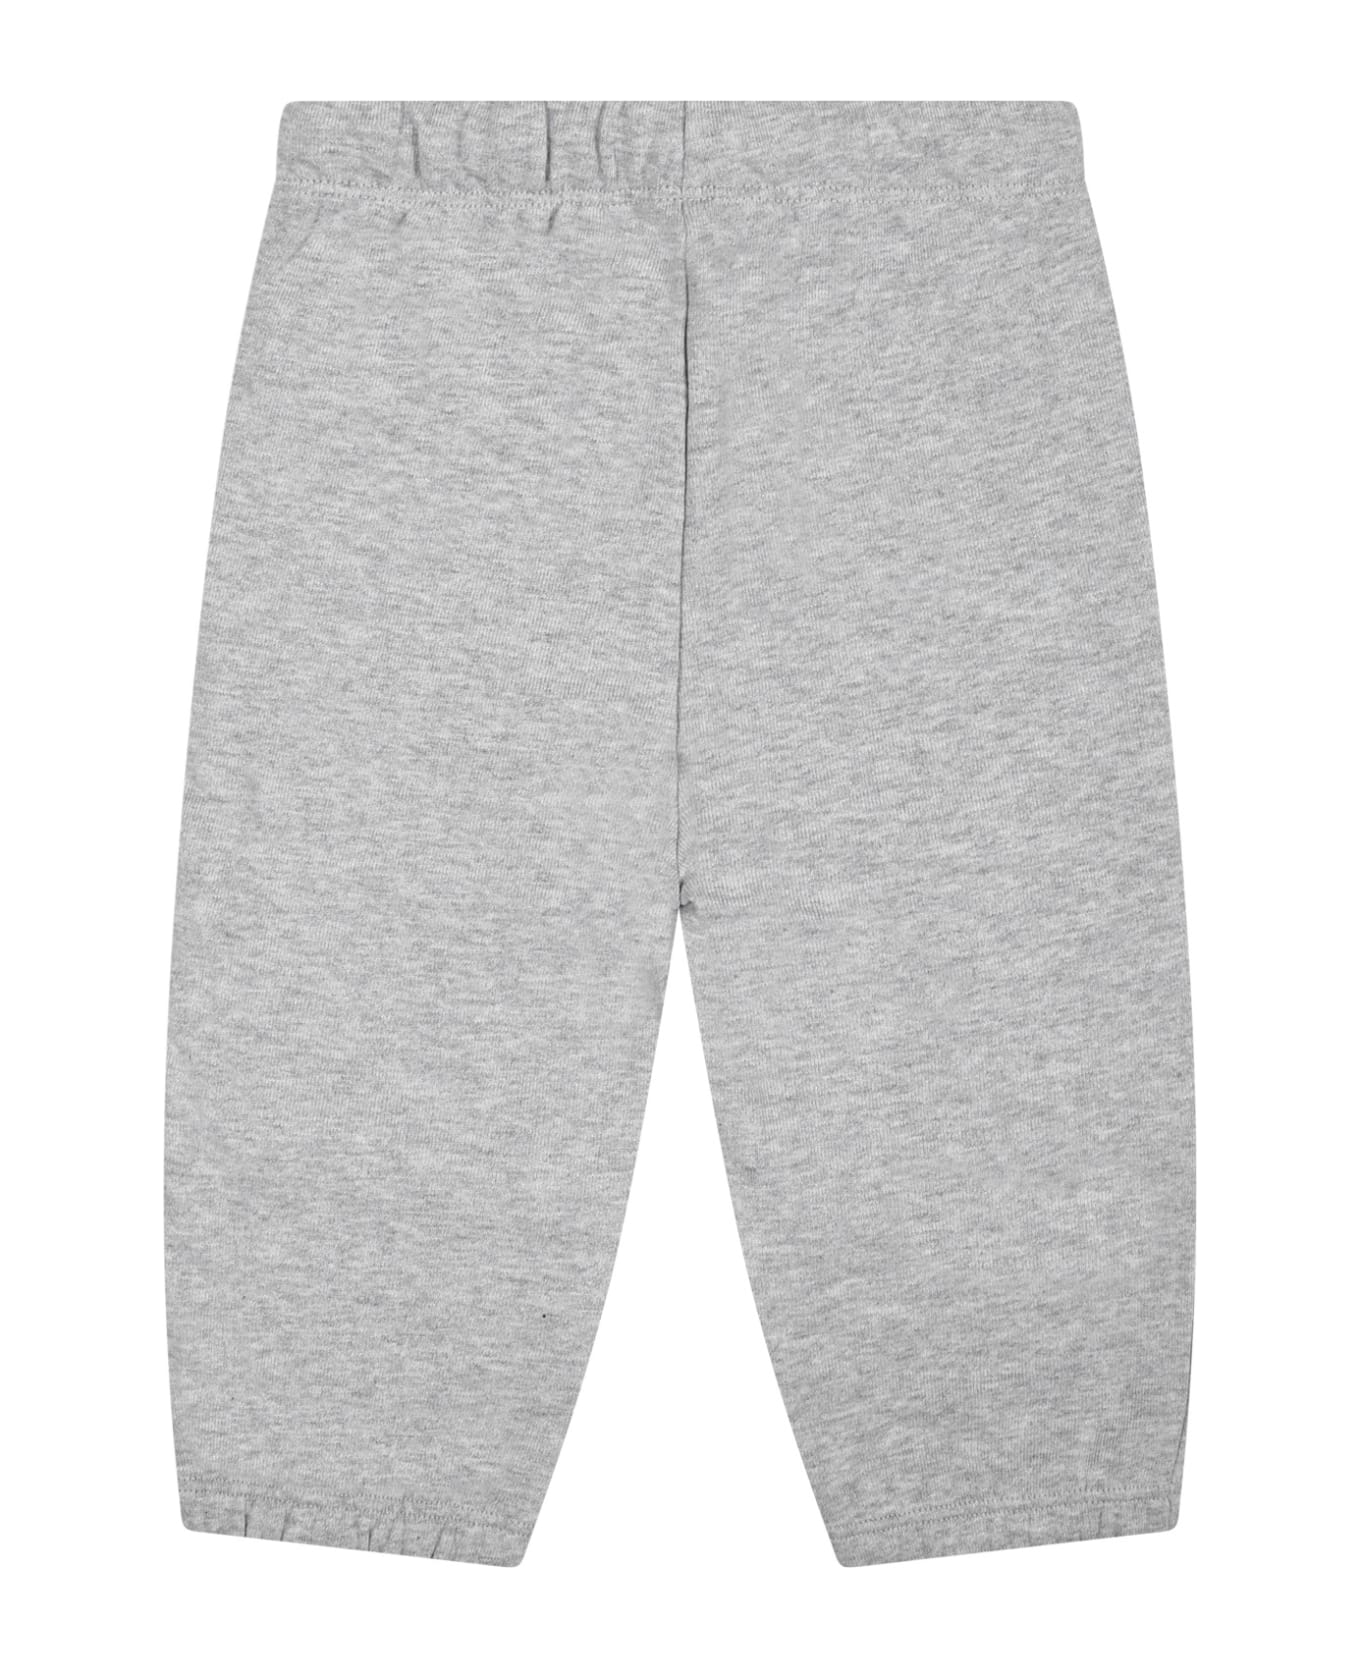 Stella McCartney Gray Trousers For Baby Boy With Shark Fin Print - Grigio